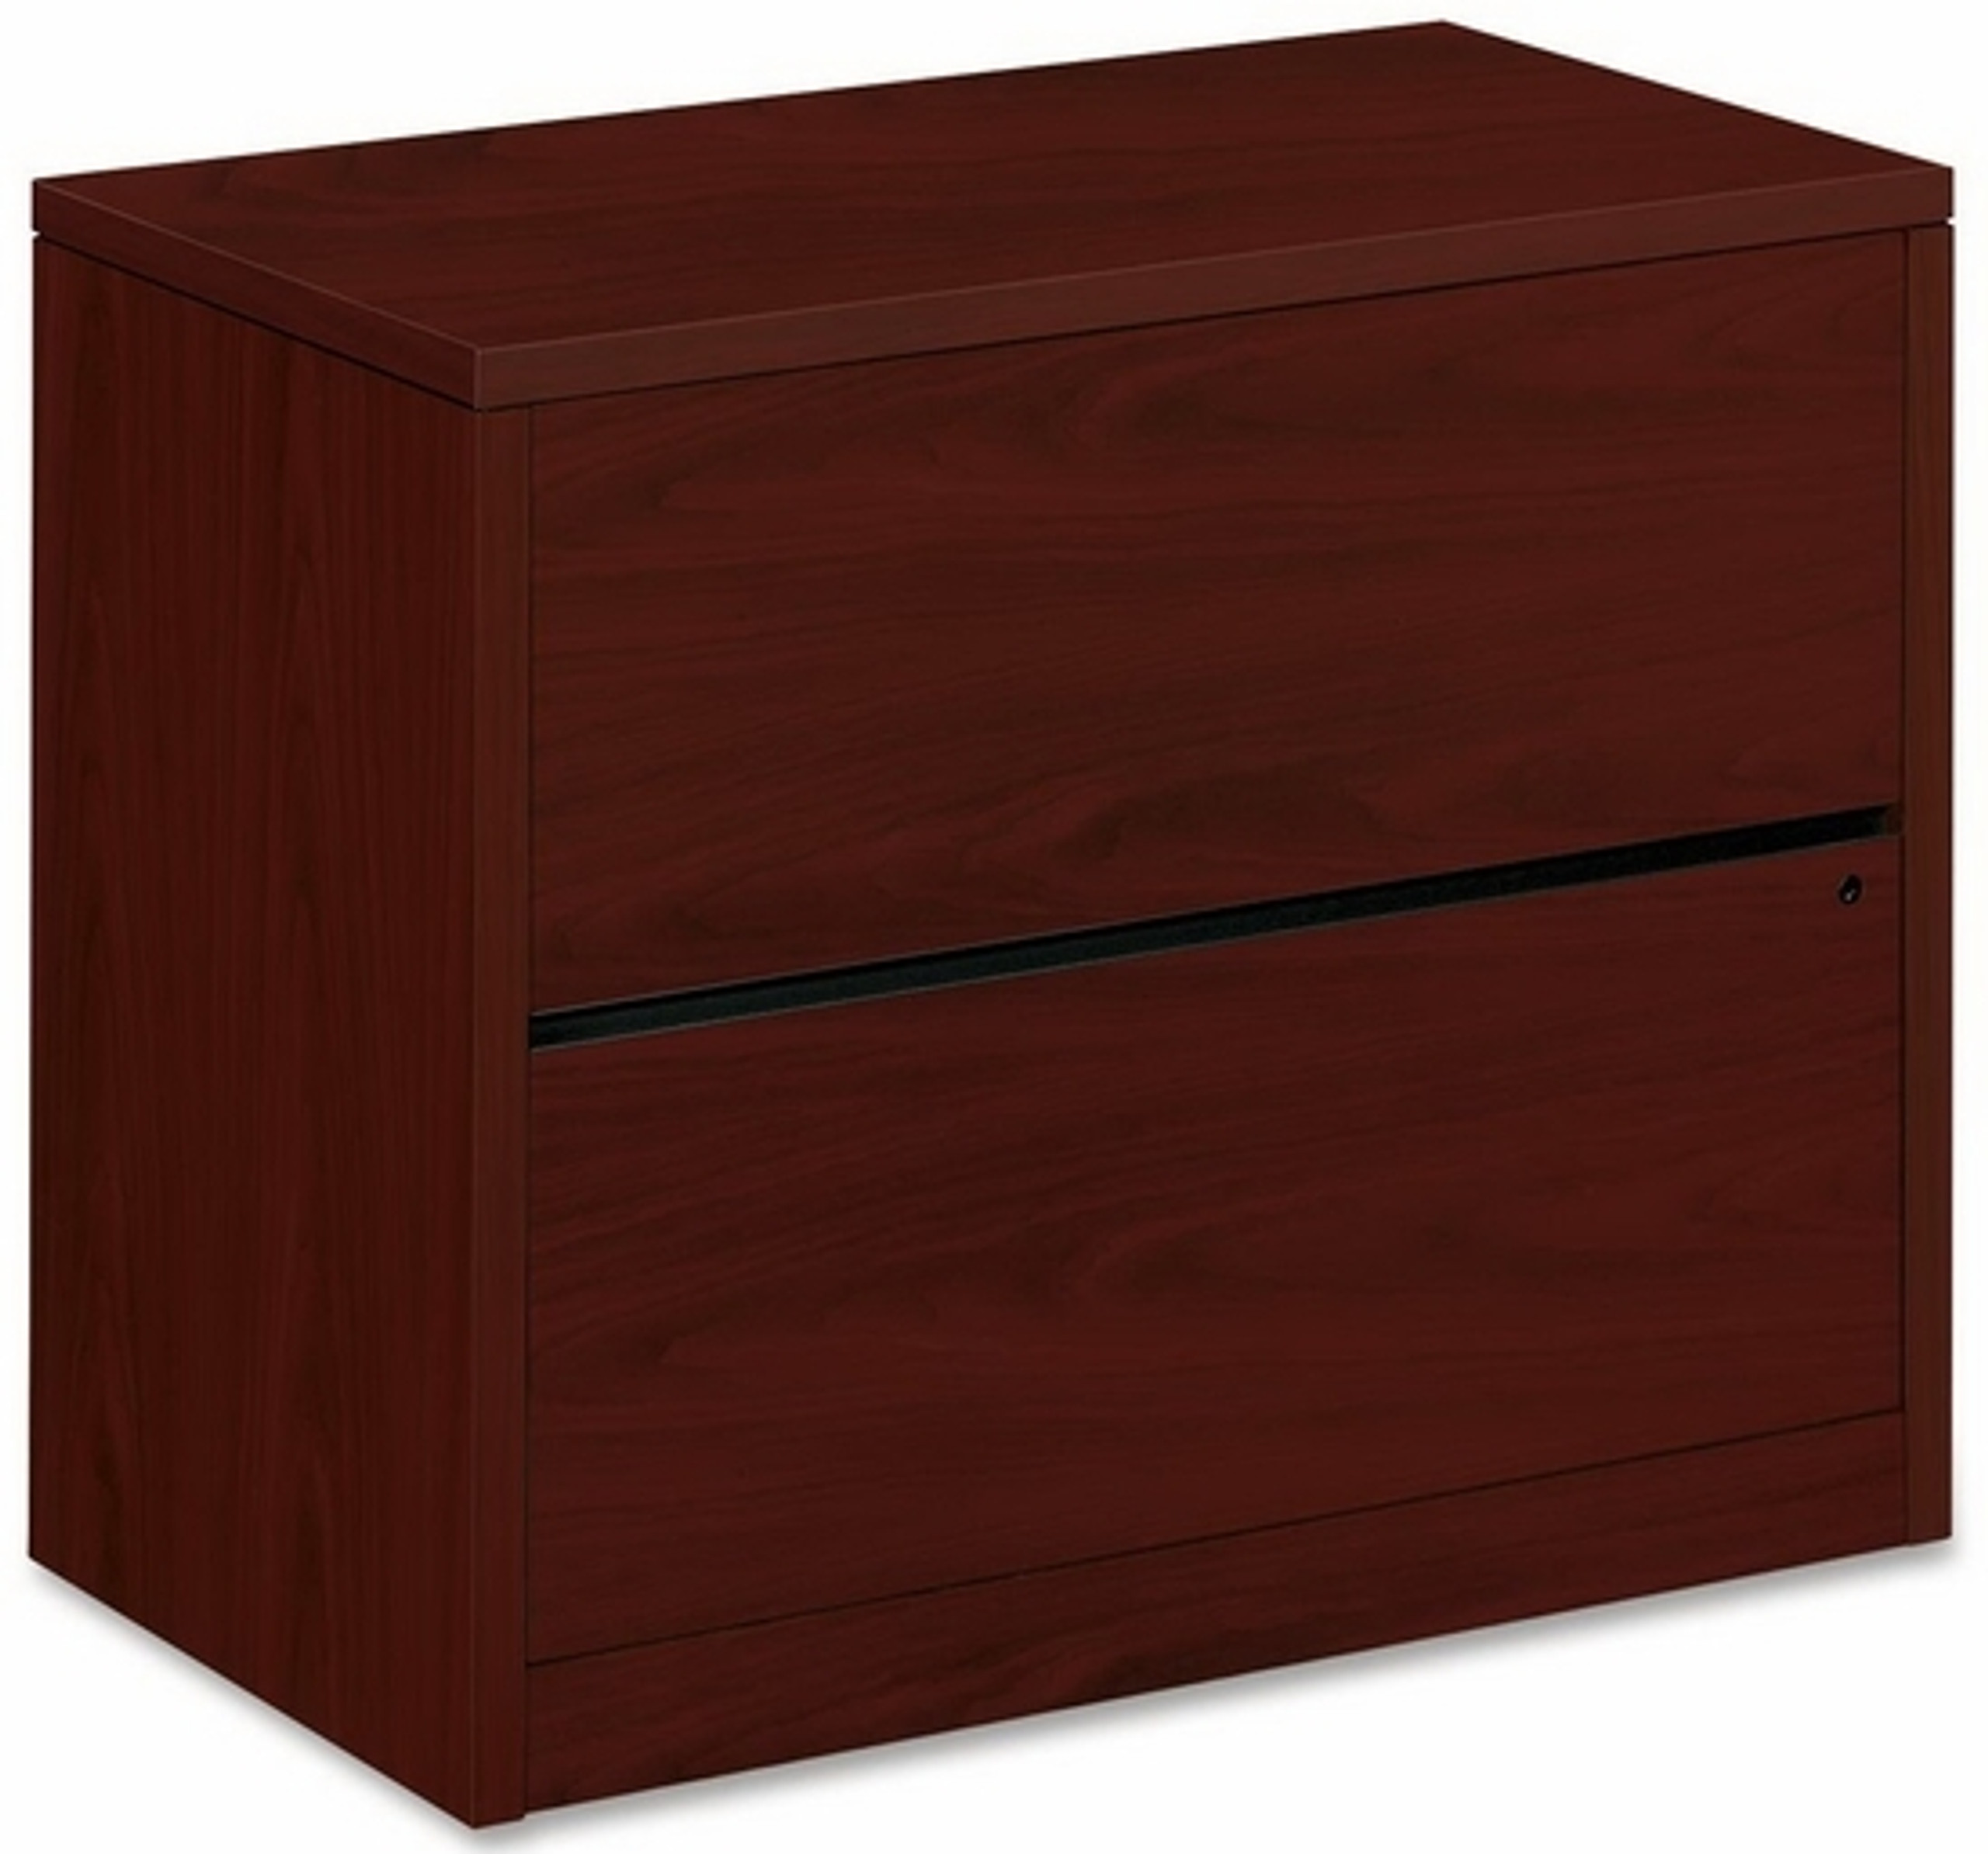 Wood File HON 2 Drawer Lateral Wood Finish File